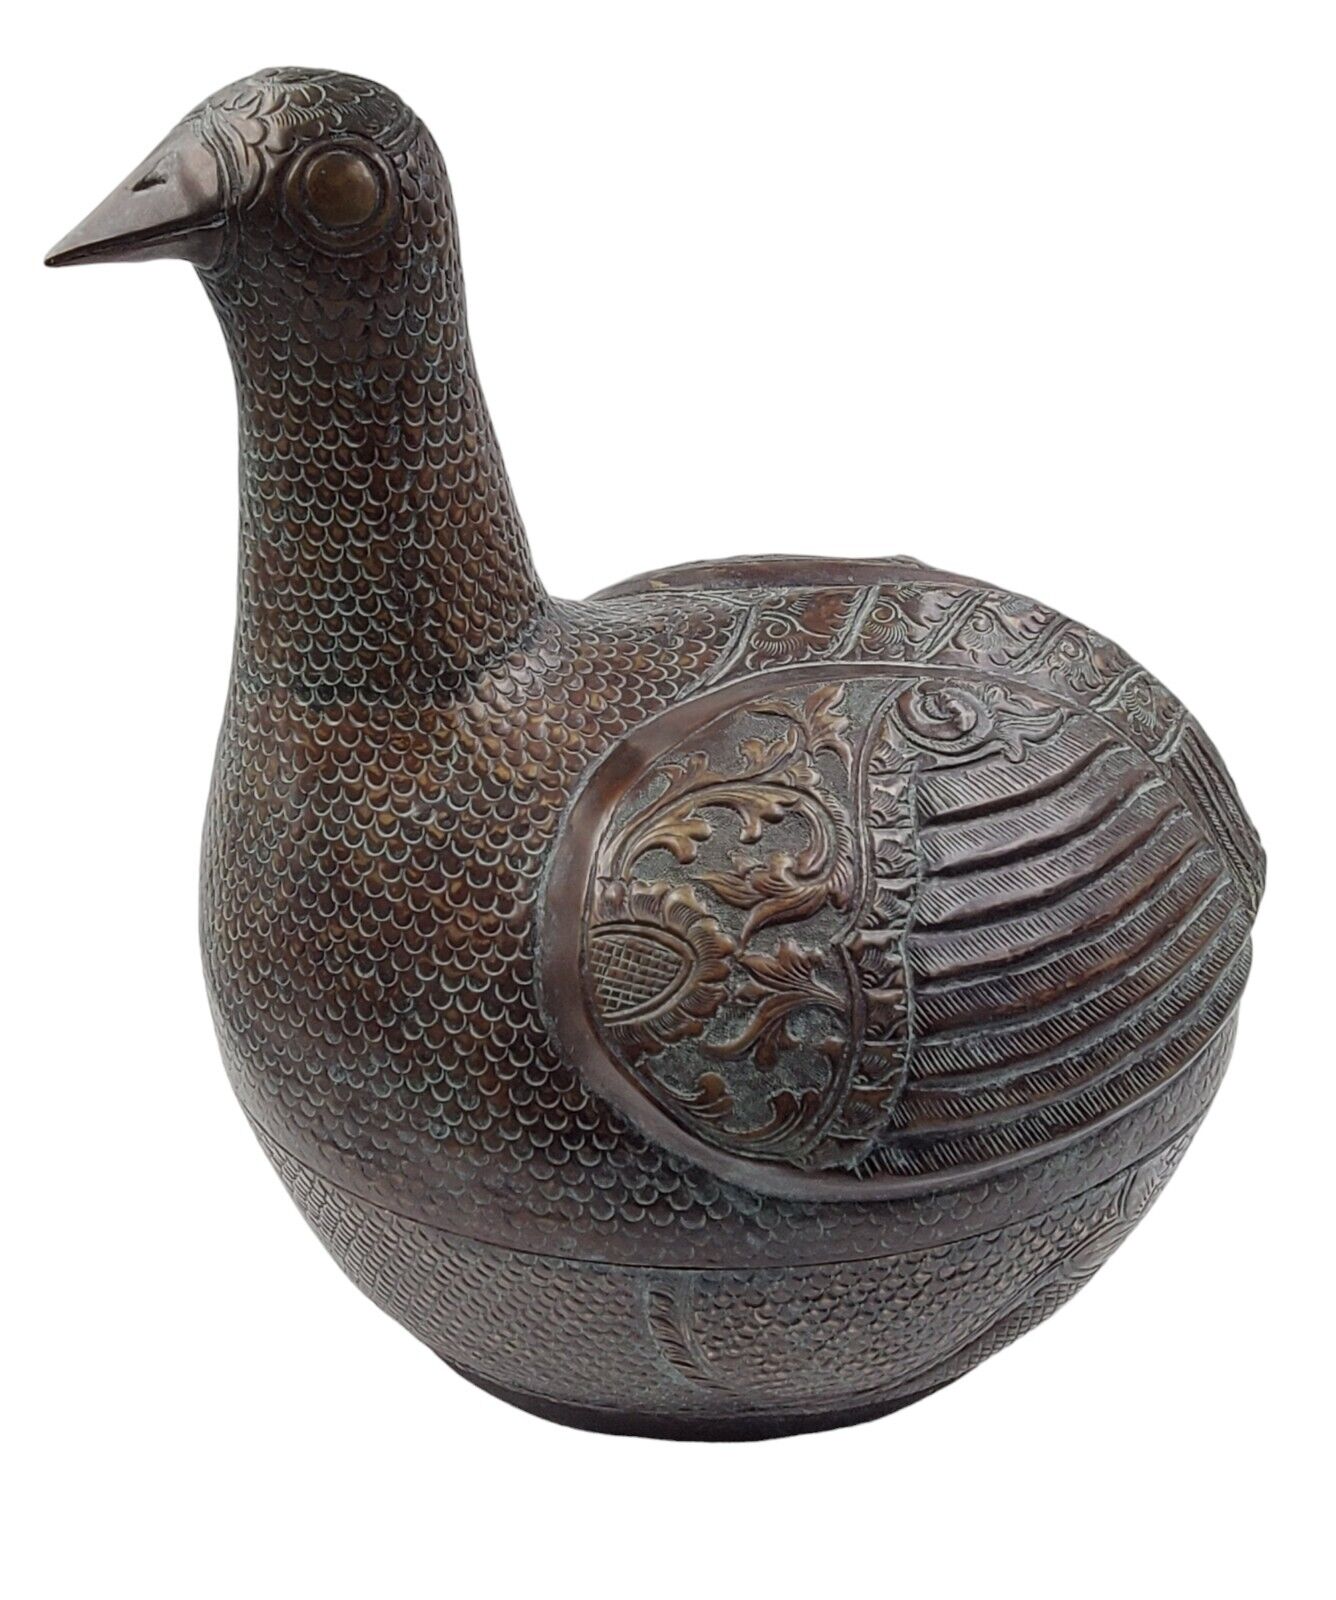 Ornate Carved Metal Brass Duck Bird Storage Container with Patina Leather Bottom